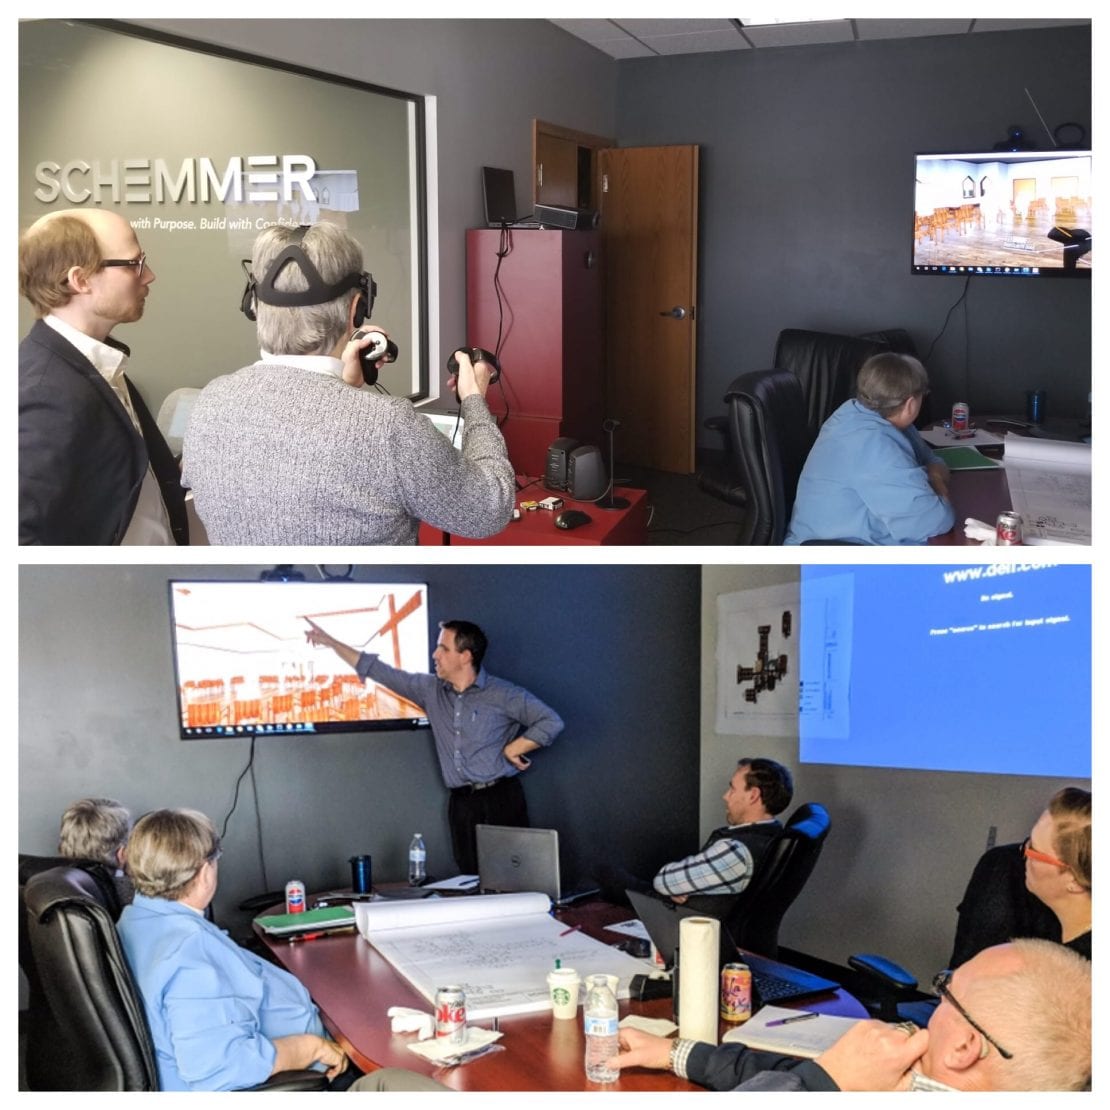 Cyclone Power is Strong in Schemmer's Des Moines Office